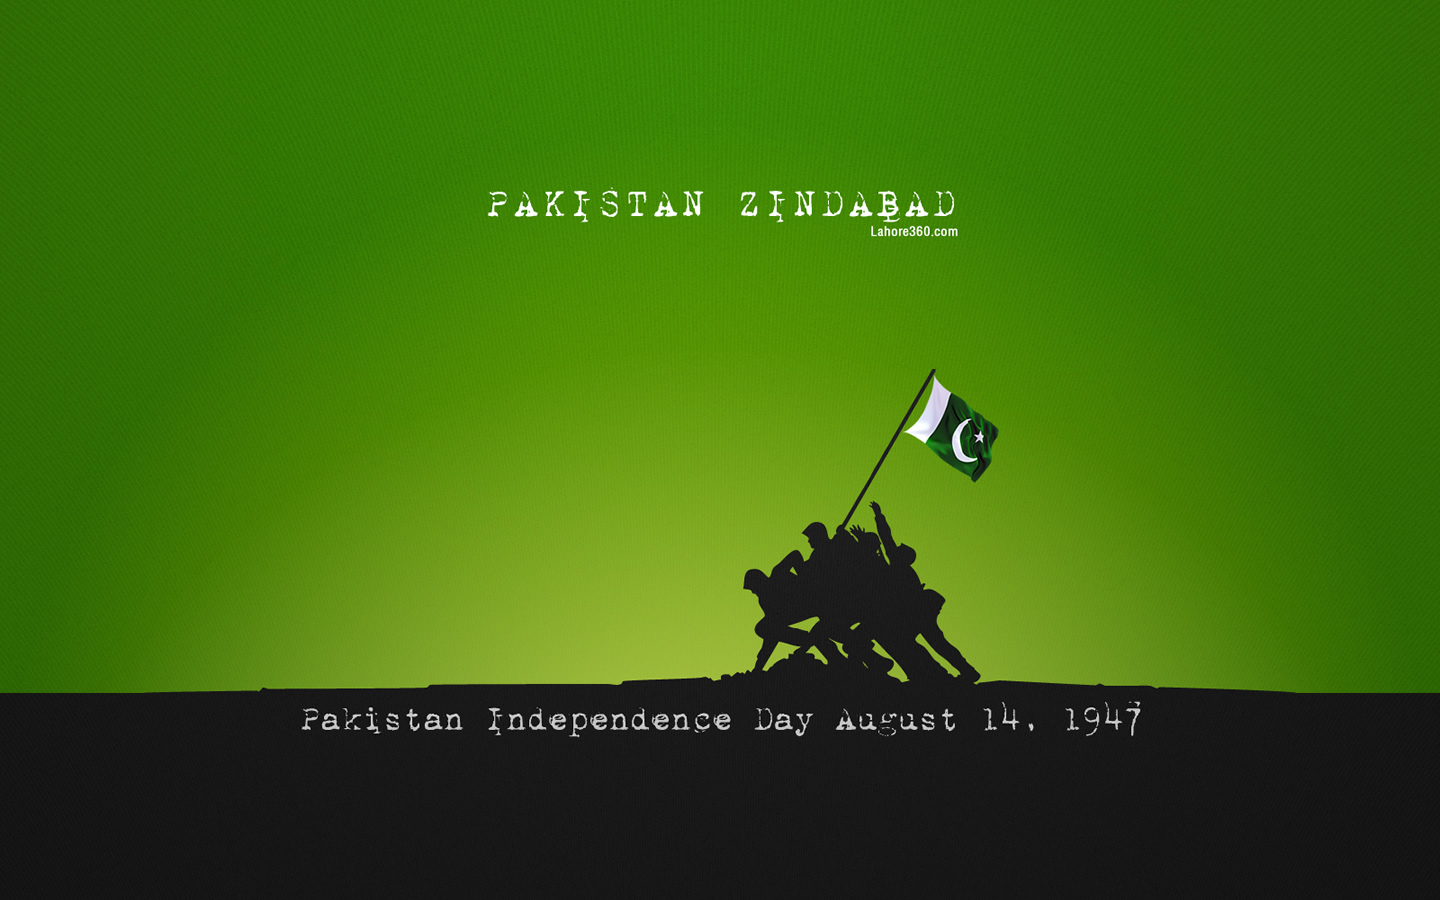 Pakistan Independence Day Wallpapers HD Pictures | One HD ...